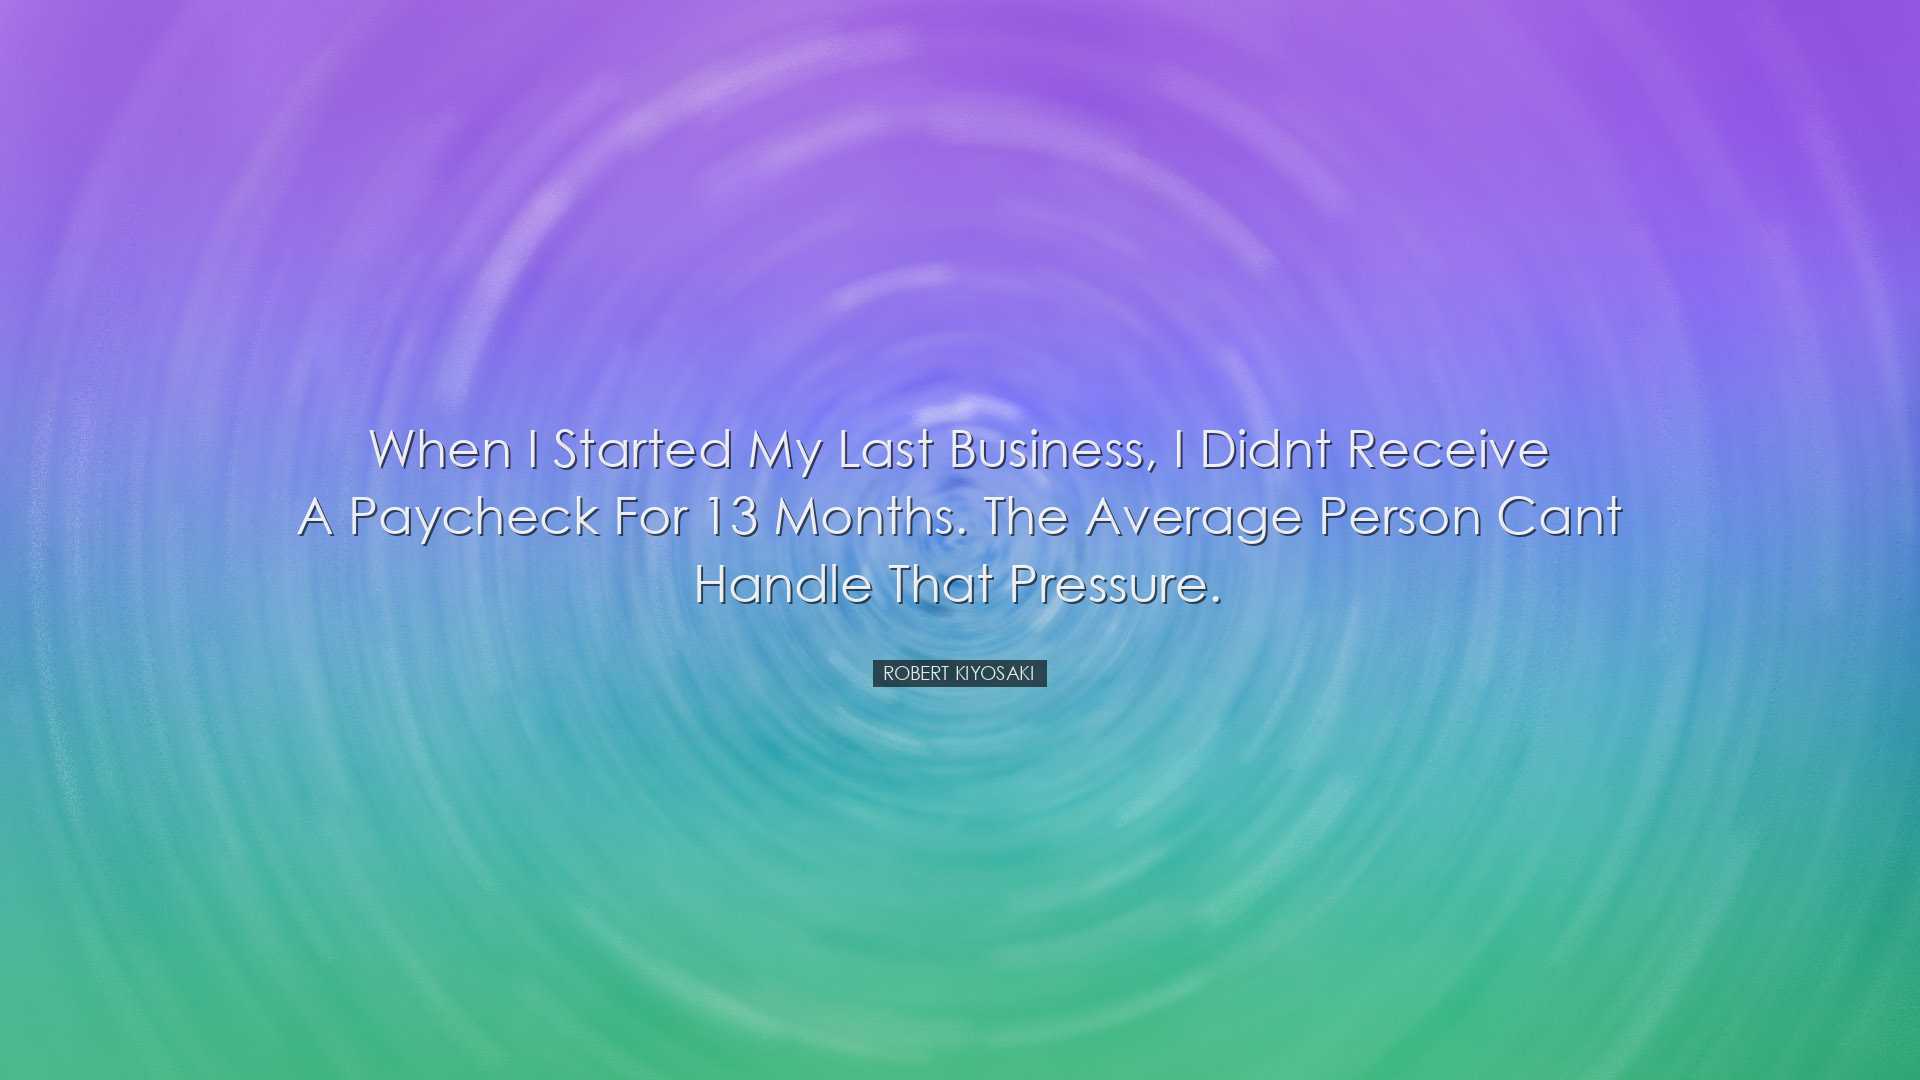 When I started my last business, I didnt receive a paycheck for 13